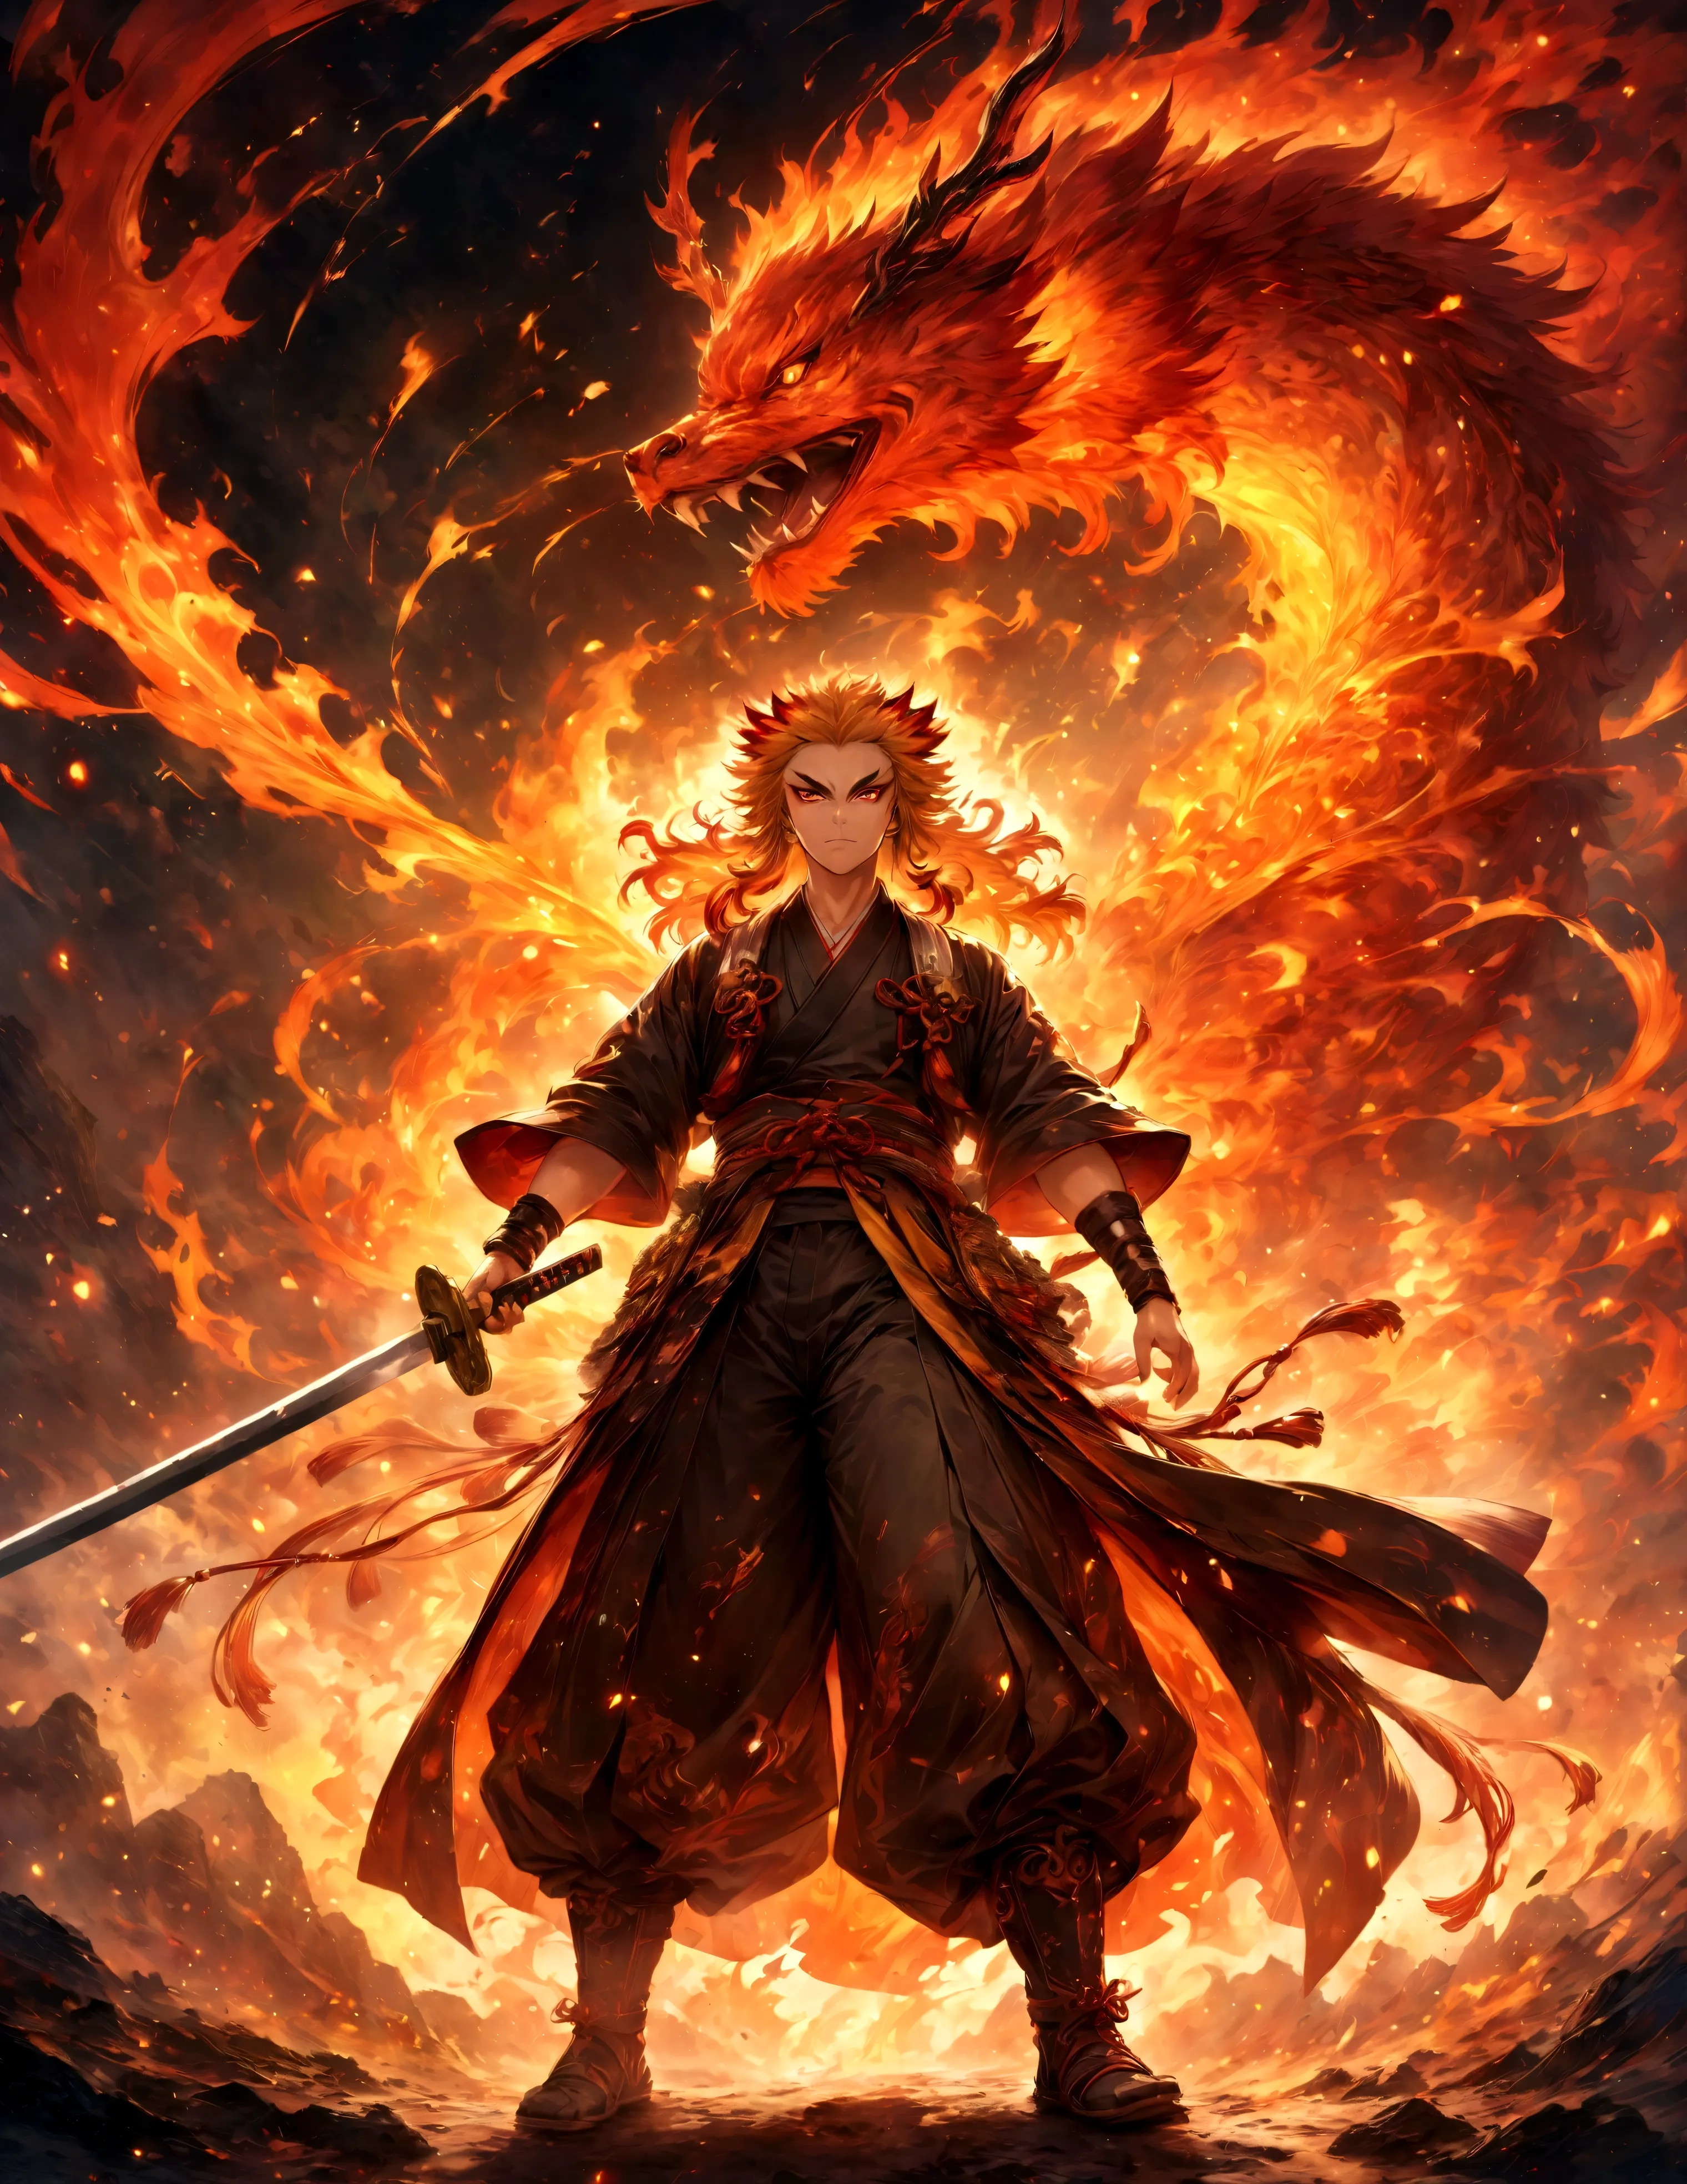 (1 male,Rengoku Kyojuro,Yellow and orange hair),solo,comics『Demon slayer』Characters in,,Battle Style,Fire effect,Staring straigh...